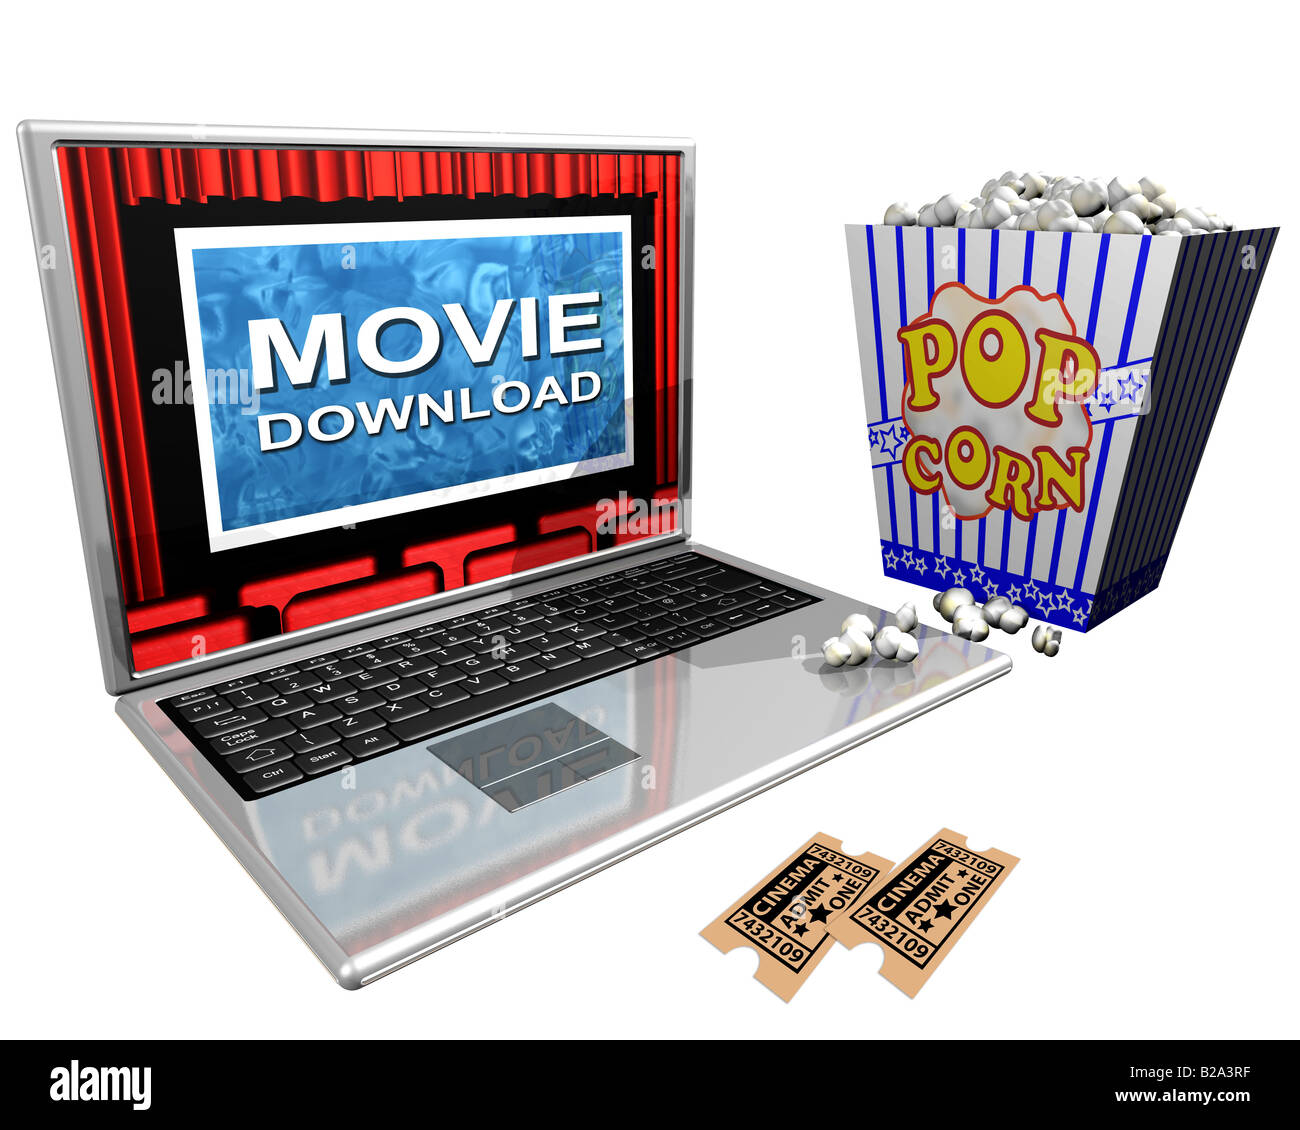 Isolated illustration of a laptop and a bucket of popcorn portraying movie downloads over the Internet Stock Photo